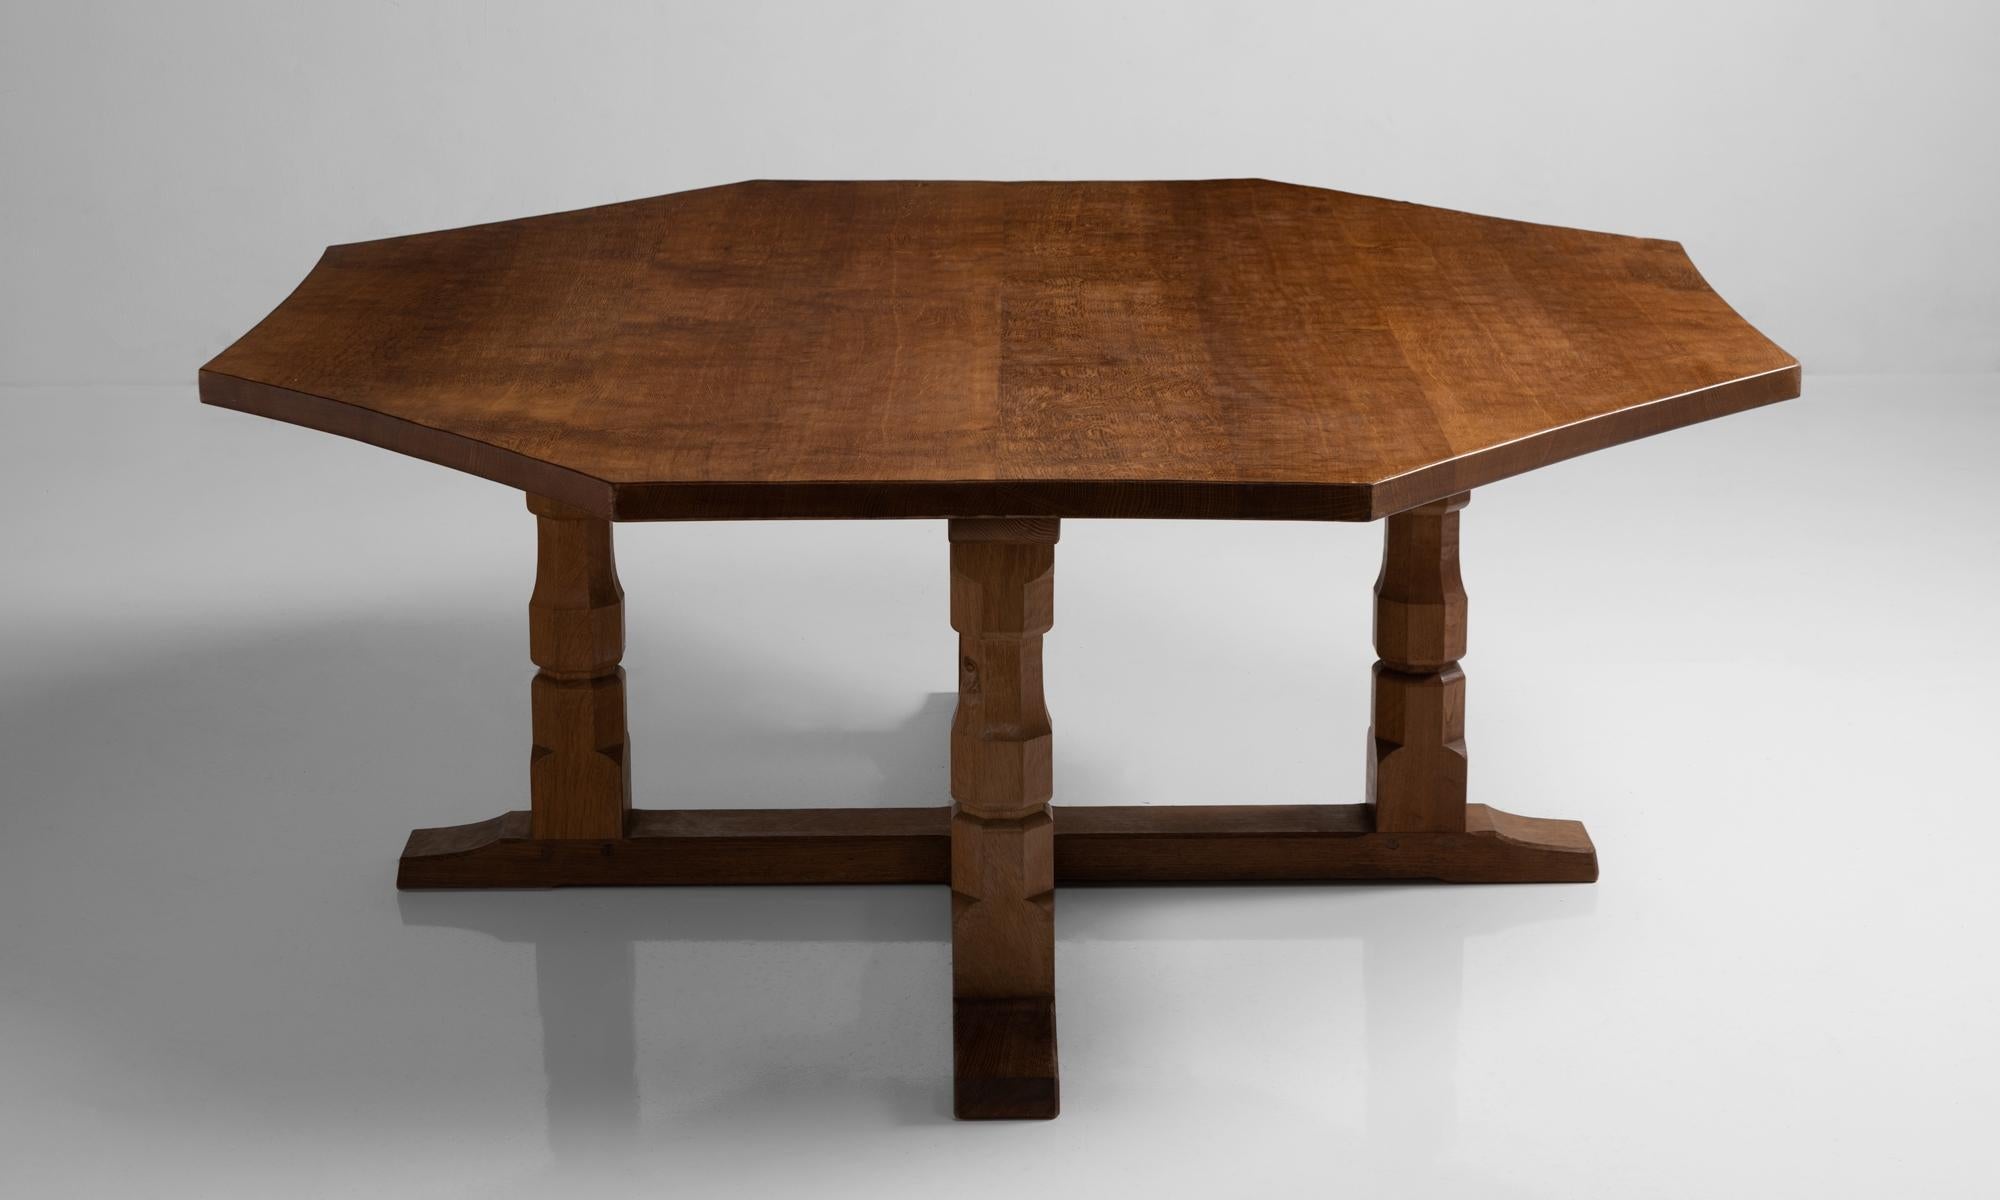 Octagonal centre table by Robert “Mouseman” Thompson, England, circa 1950.

Solid oak construction with scalloped top and carved mouse relief.